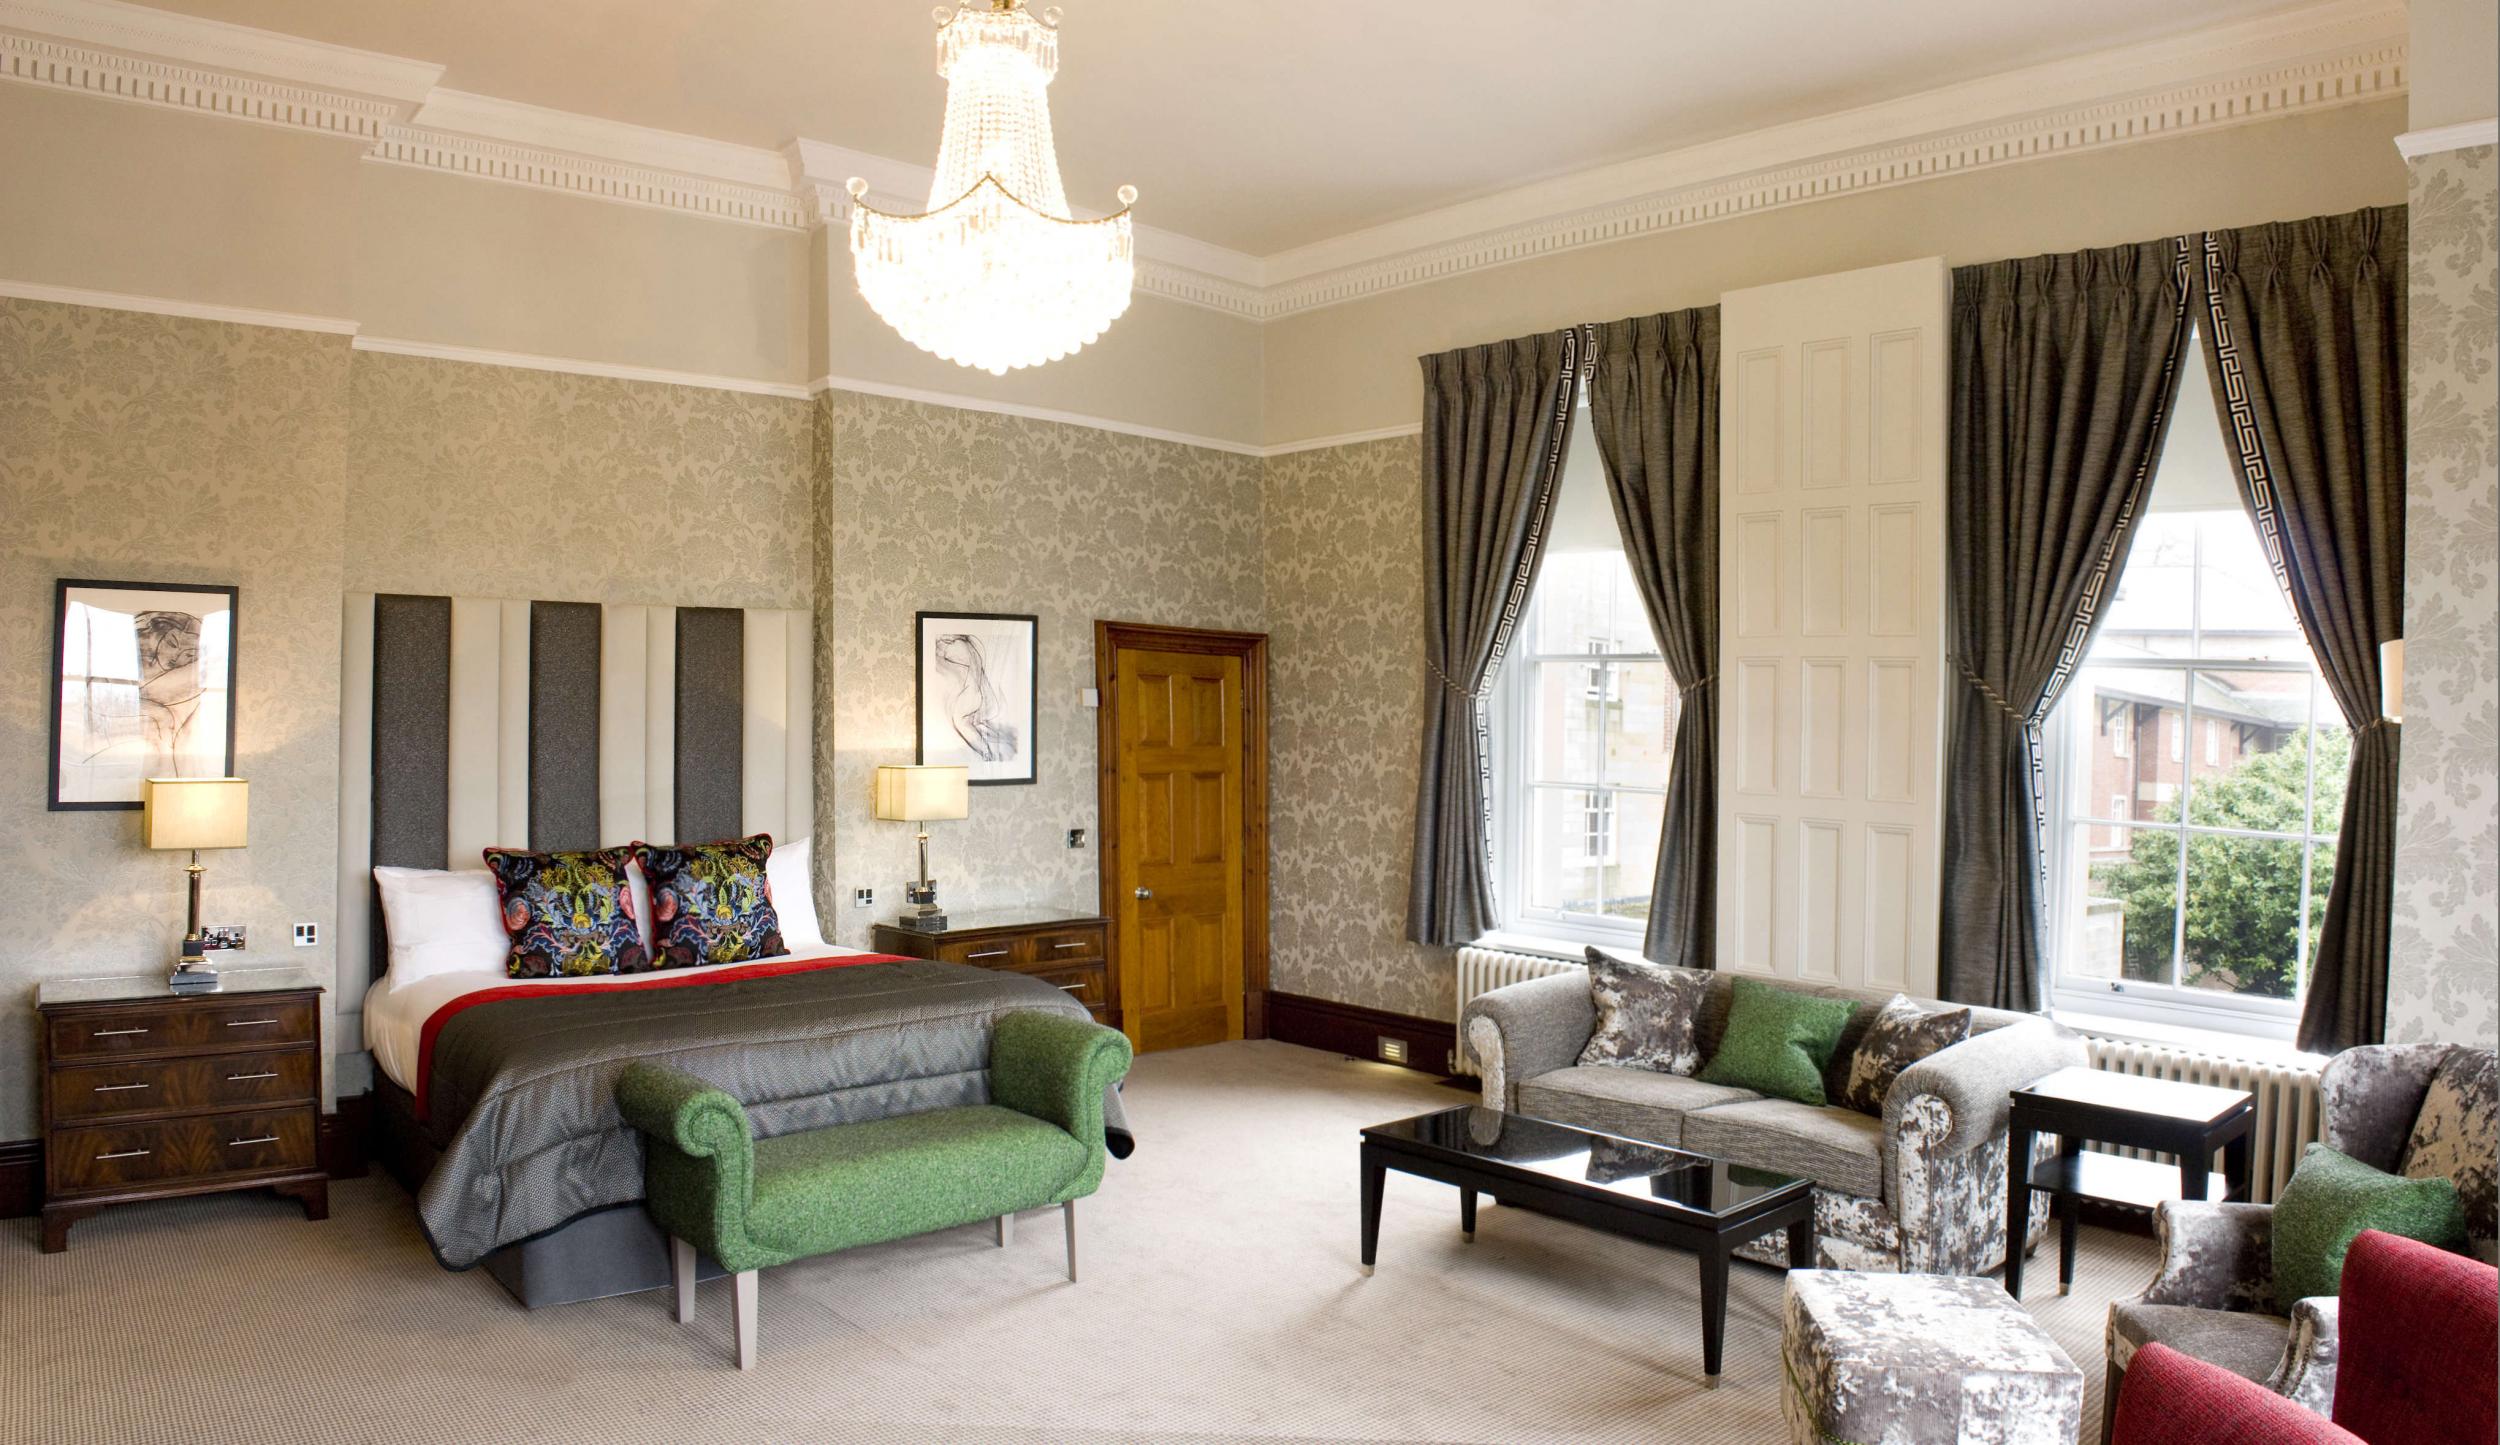 One of the airy and spacious bedroom suites at Oulton Hall